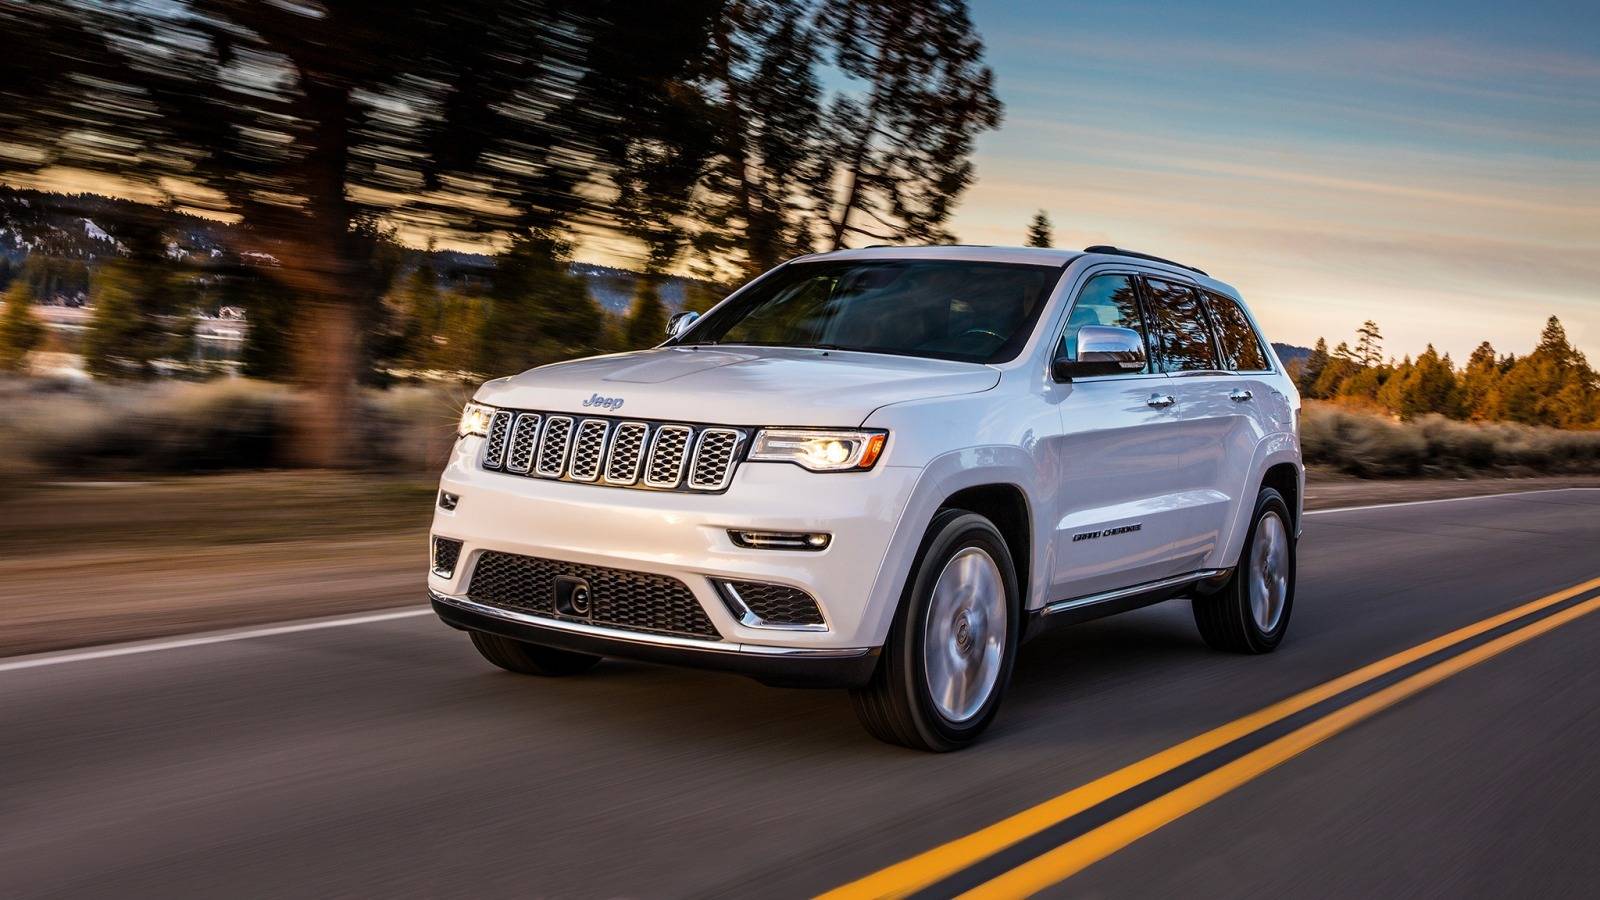 Jeep Grand Cherokee Pricing, Features, Ratings and Reviews